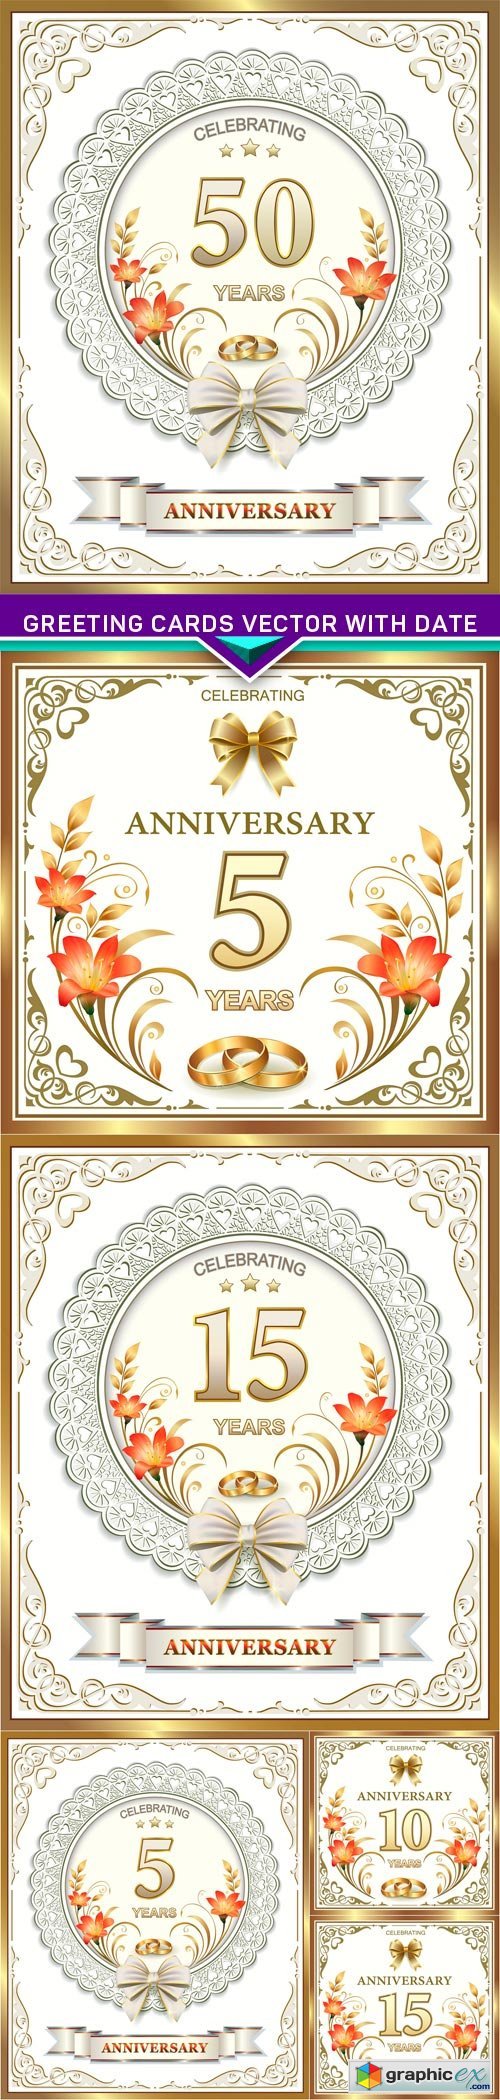 Greeting cards vector with date 6X EPS